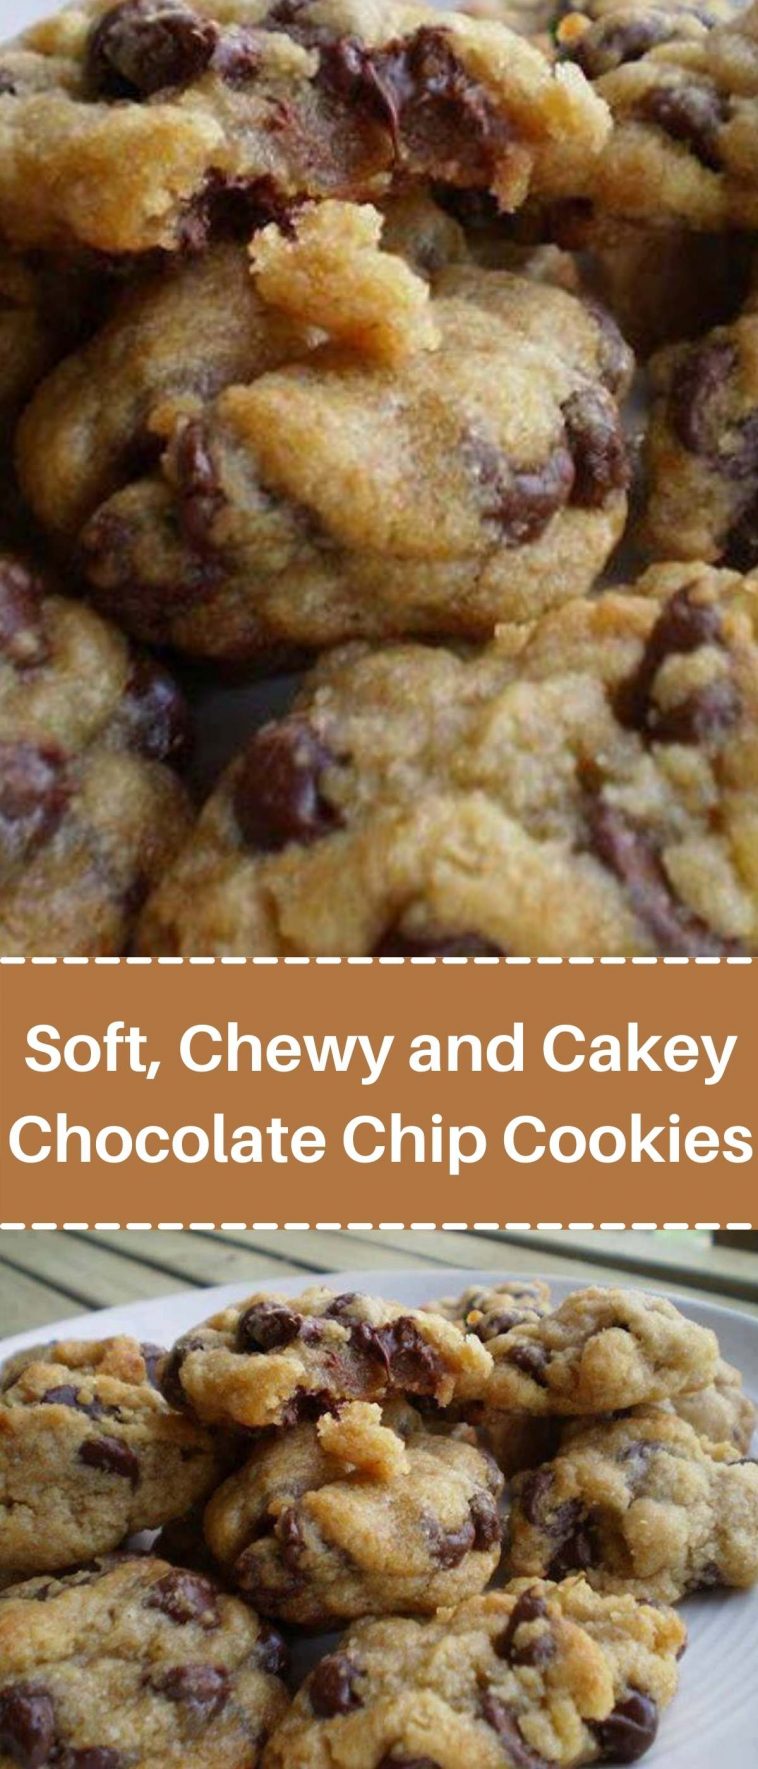 Soft, Chewy and Cakey Chocolate Chip Cookies